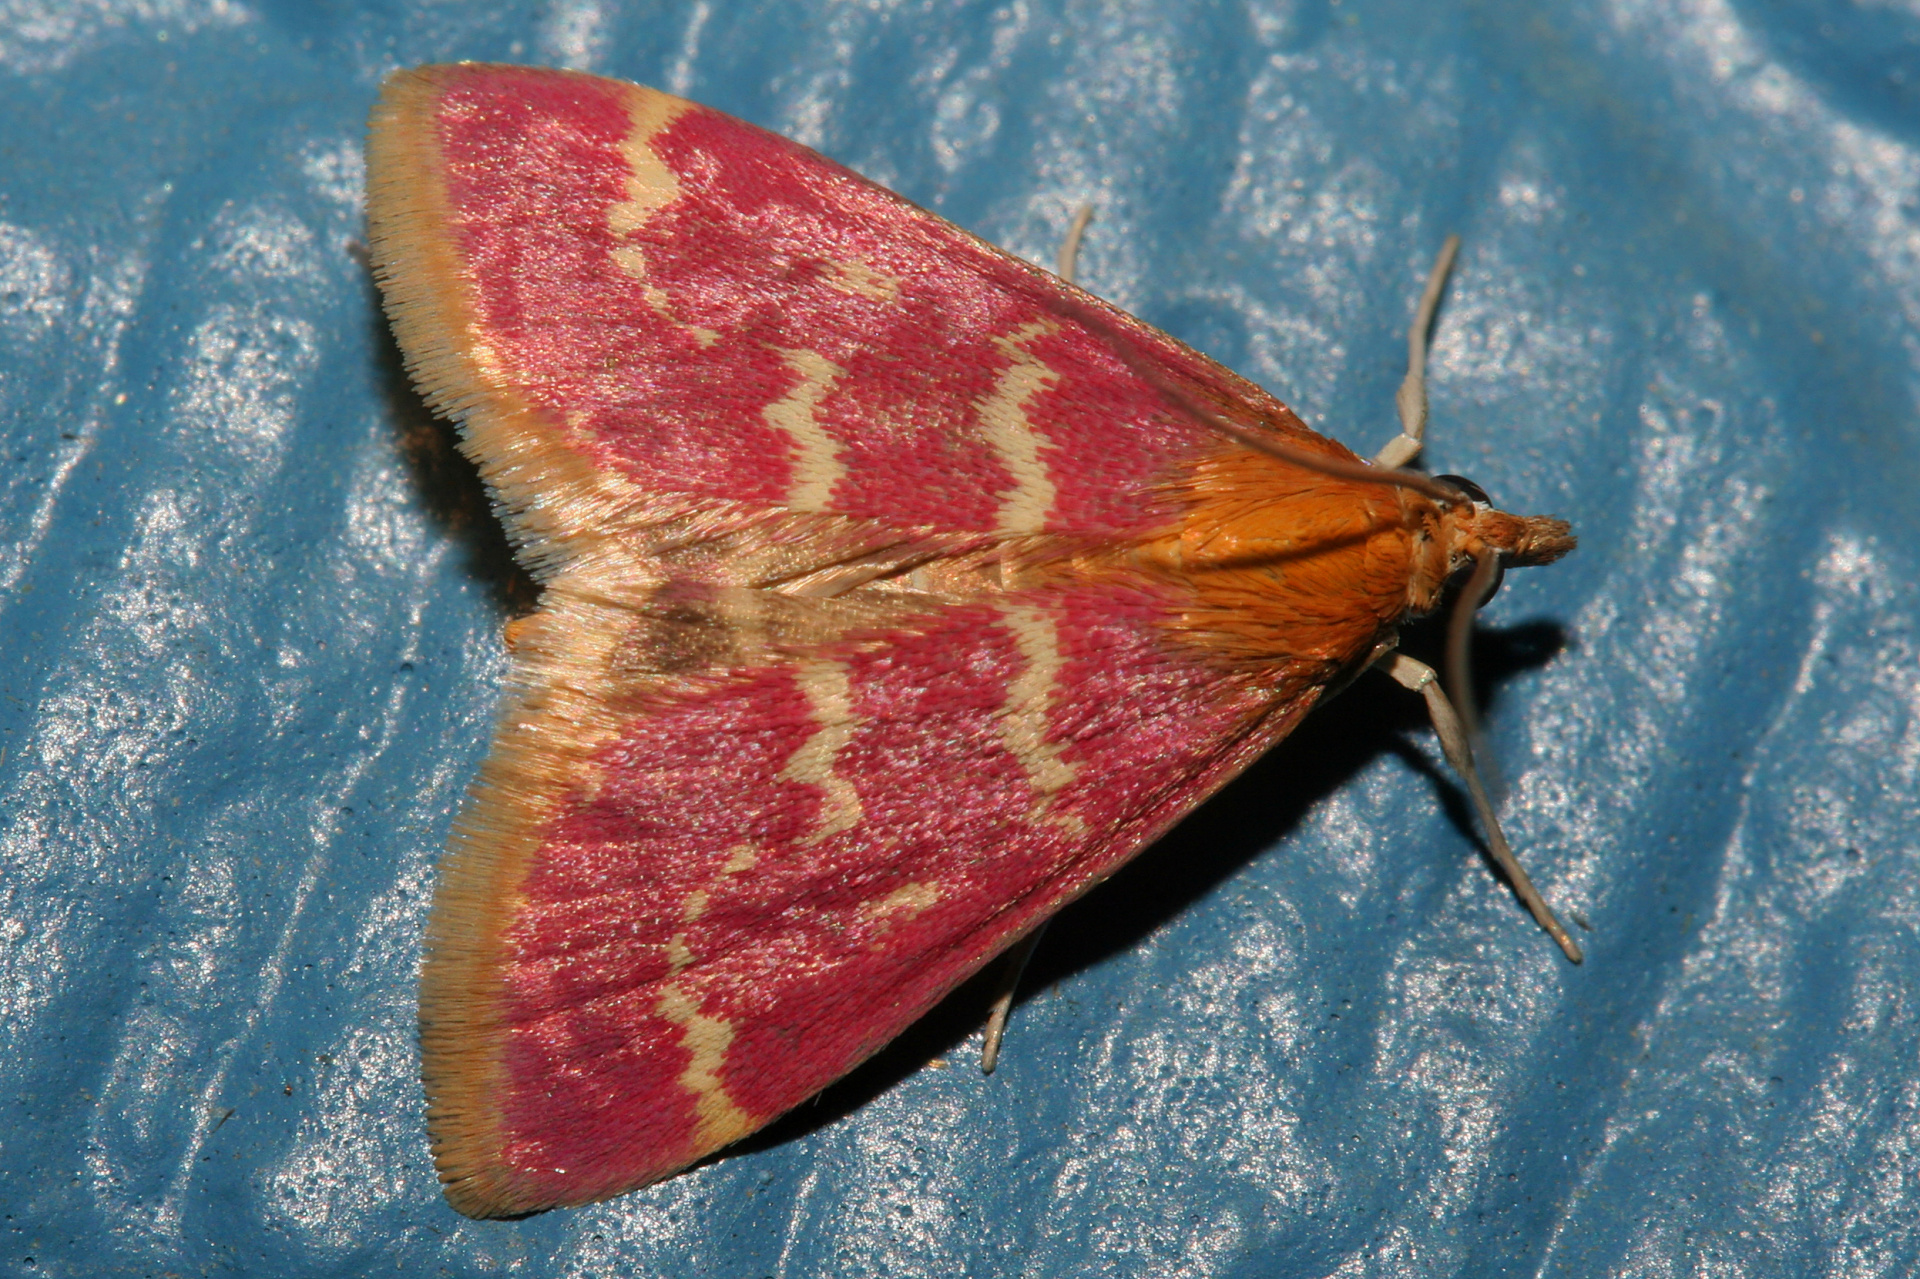 Pyrausta signatalis (Travels » US Trip 2: Cheyenne Epic » Animals » Insects » Butterfies and Moths » Crambidae)